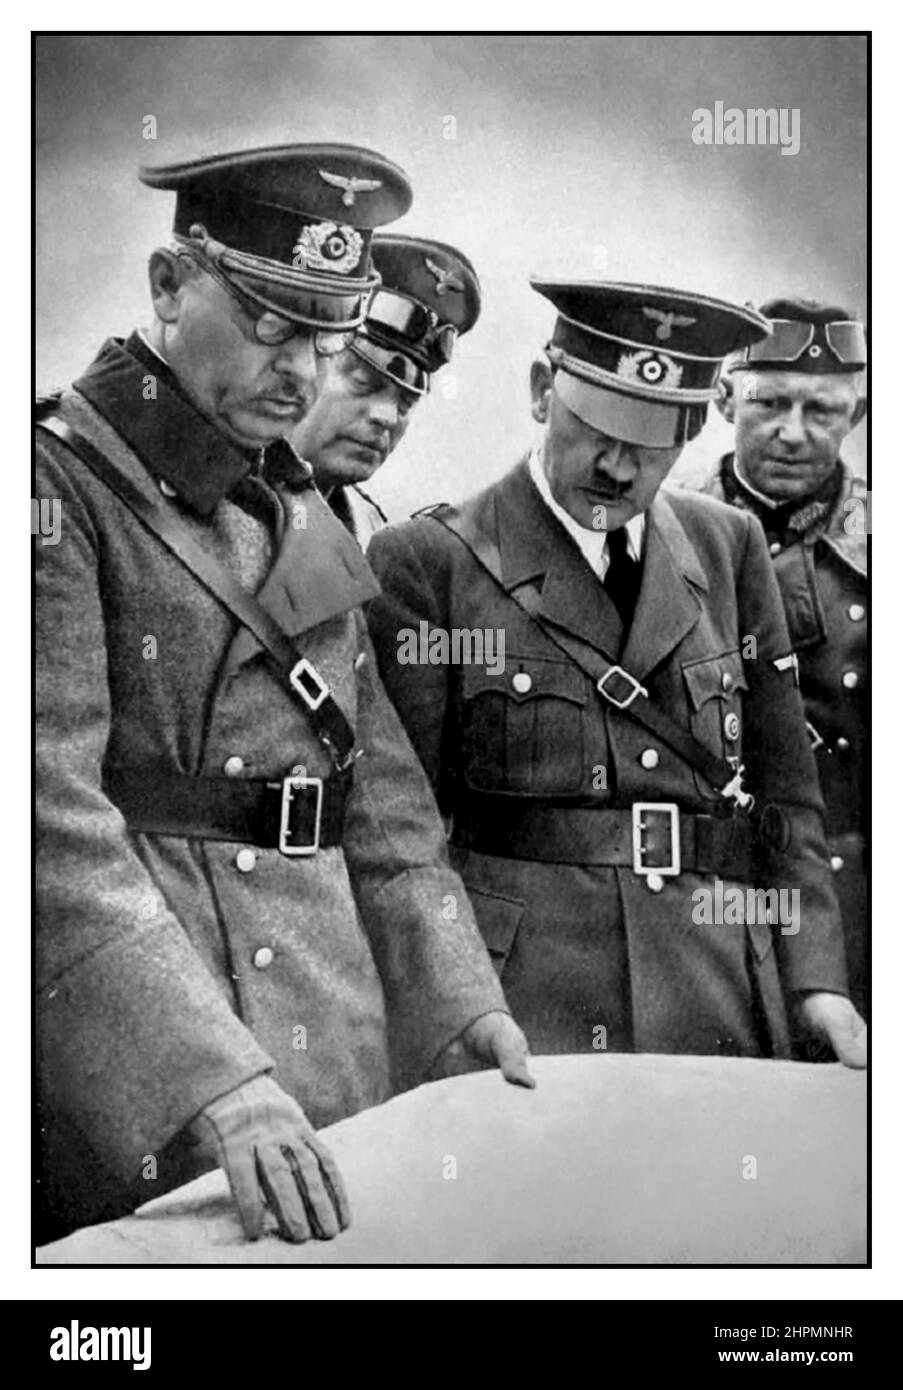 WW2, Poland Second World War 1939, Polish invasion occupation  campaign, Adolf Hitler discusses battle plans explained to him on the Polish front by (on left) Generaloberst Wilhelm List, Commander-in-Chief of the 14th Army. Between List & Adolf Hitler, General Wilhelm Keitel, Chief of the High Command of the Wehrmacht. Far right General Alfred Jodl, chief of the Wehrmacht command staff in the Wehrmacht High Command.WW2 Adolf Hitler  & Field Marshal Whilhelm Keitel look at battle plans for the invasion of Poland 1939 World War II Stock Photo